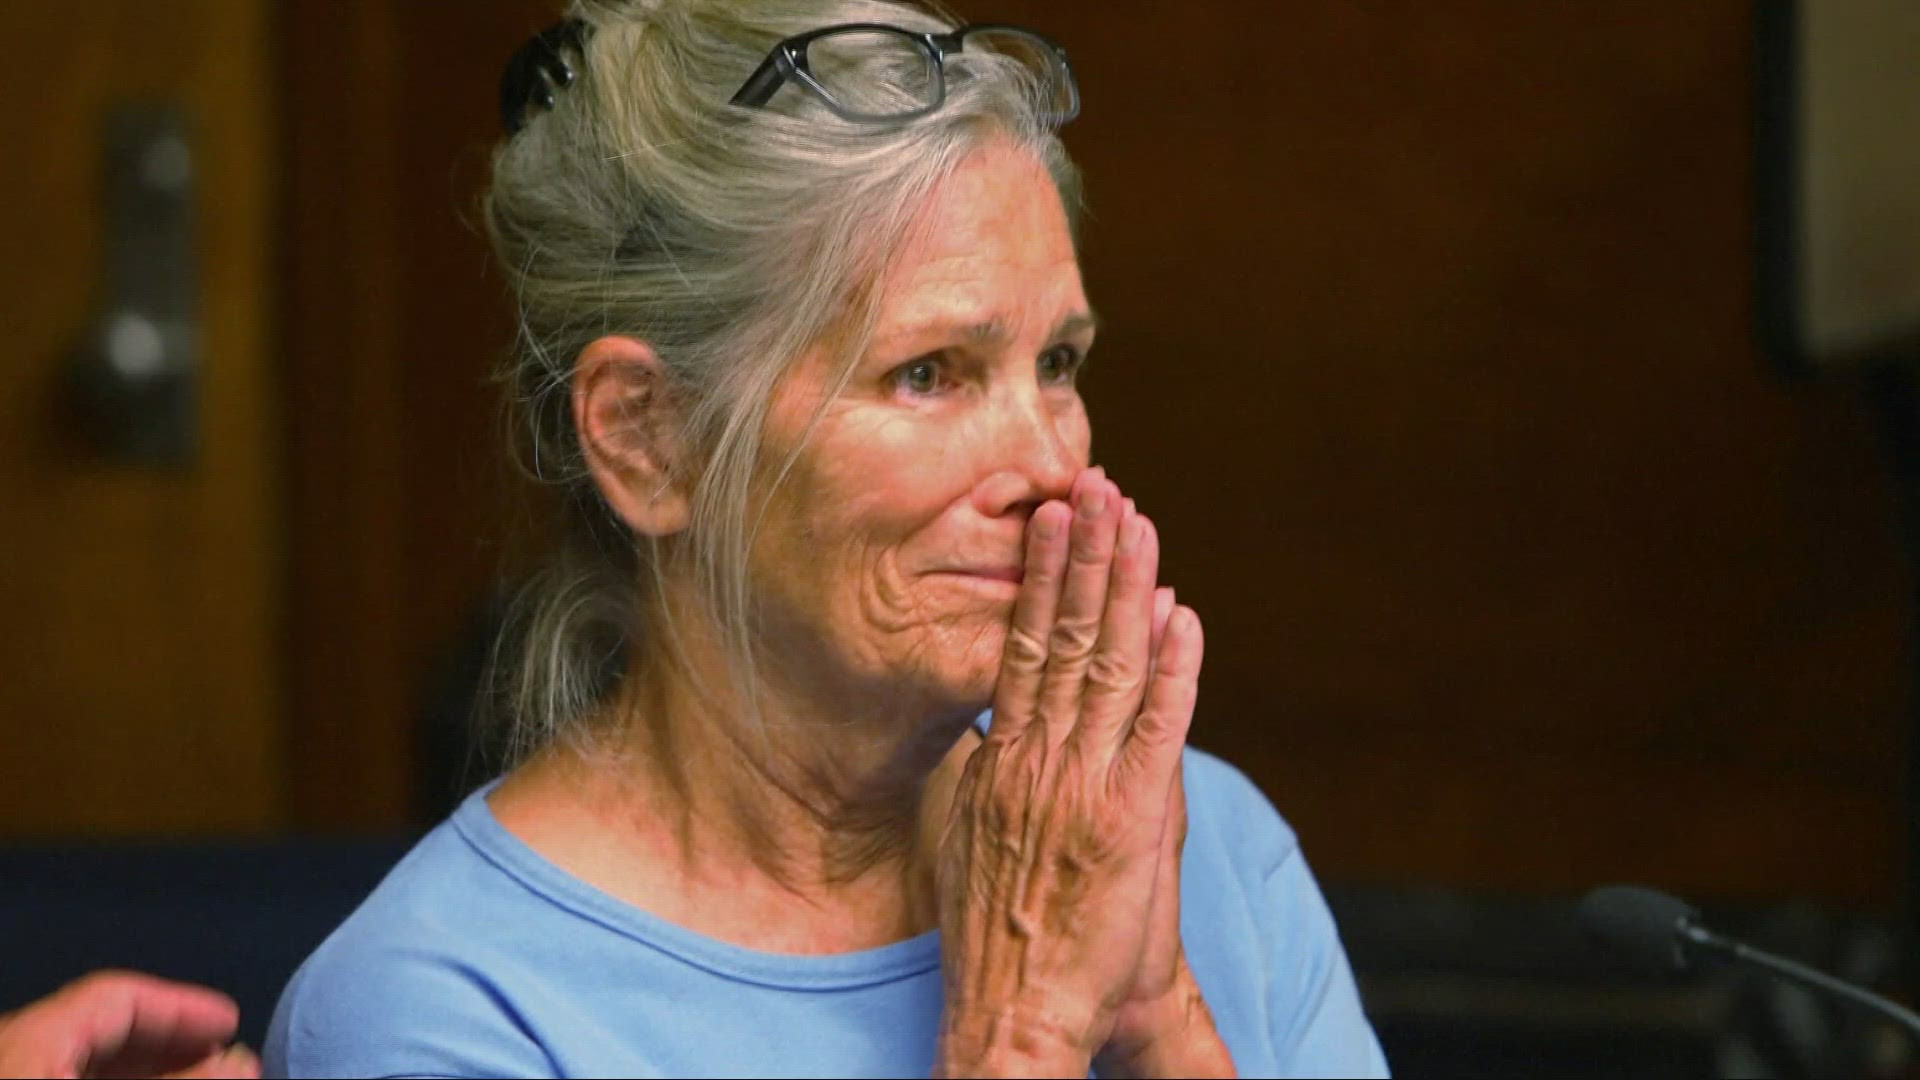 Van Houten received a life sentence for helping Manson’s followers carry out the 1969 killings of Leno LaBianca and his wife, Rosemary.